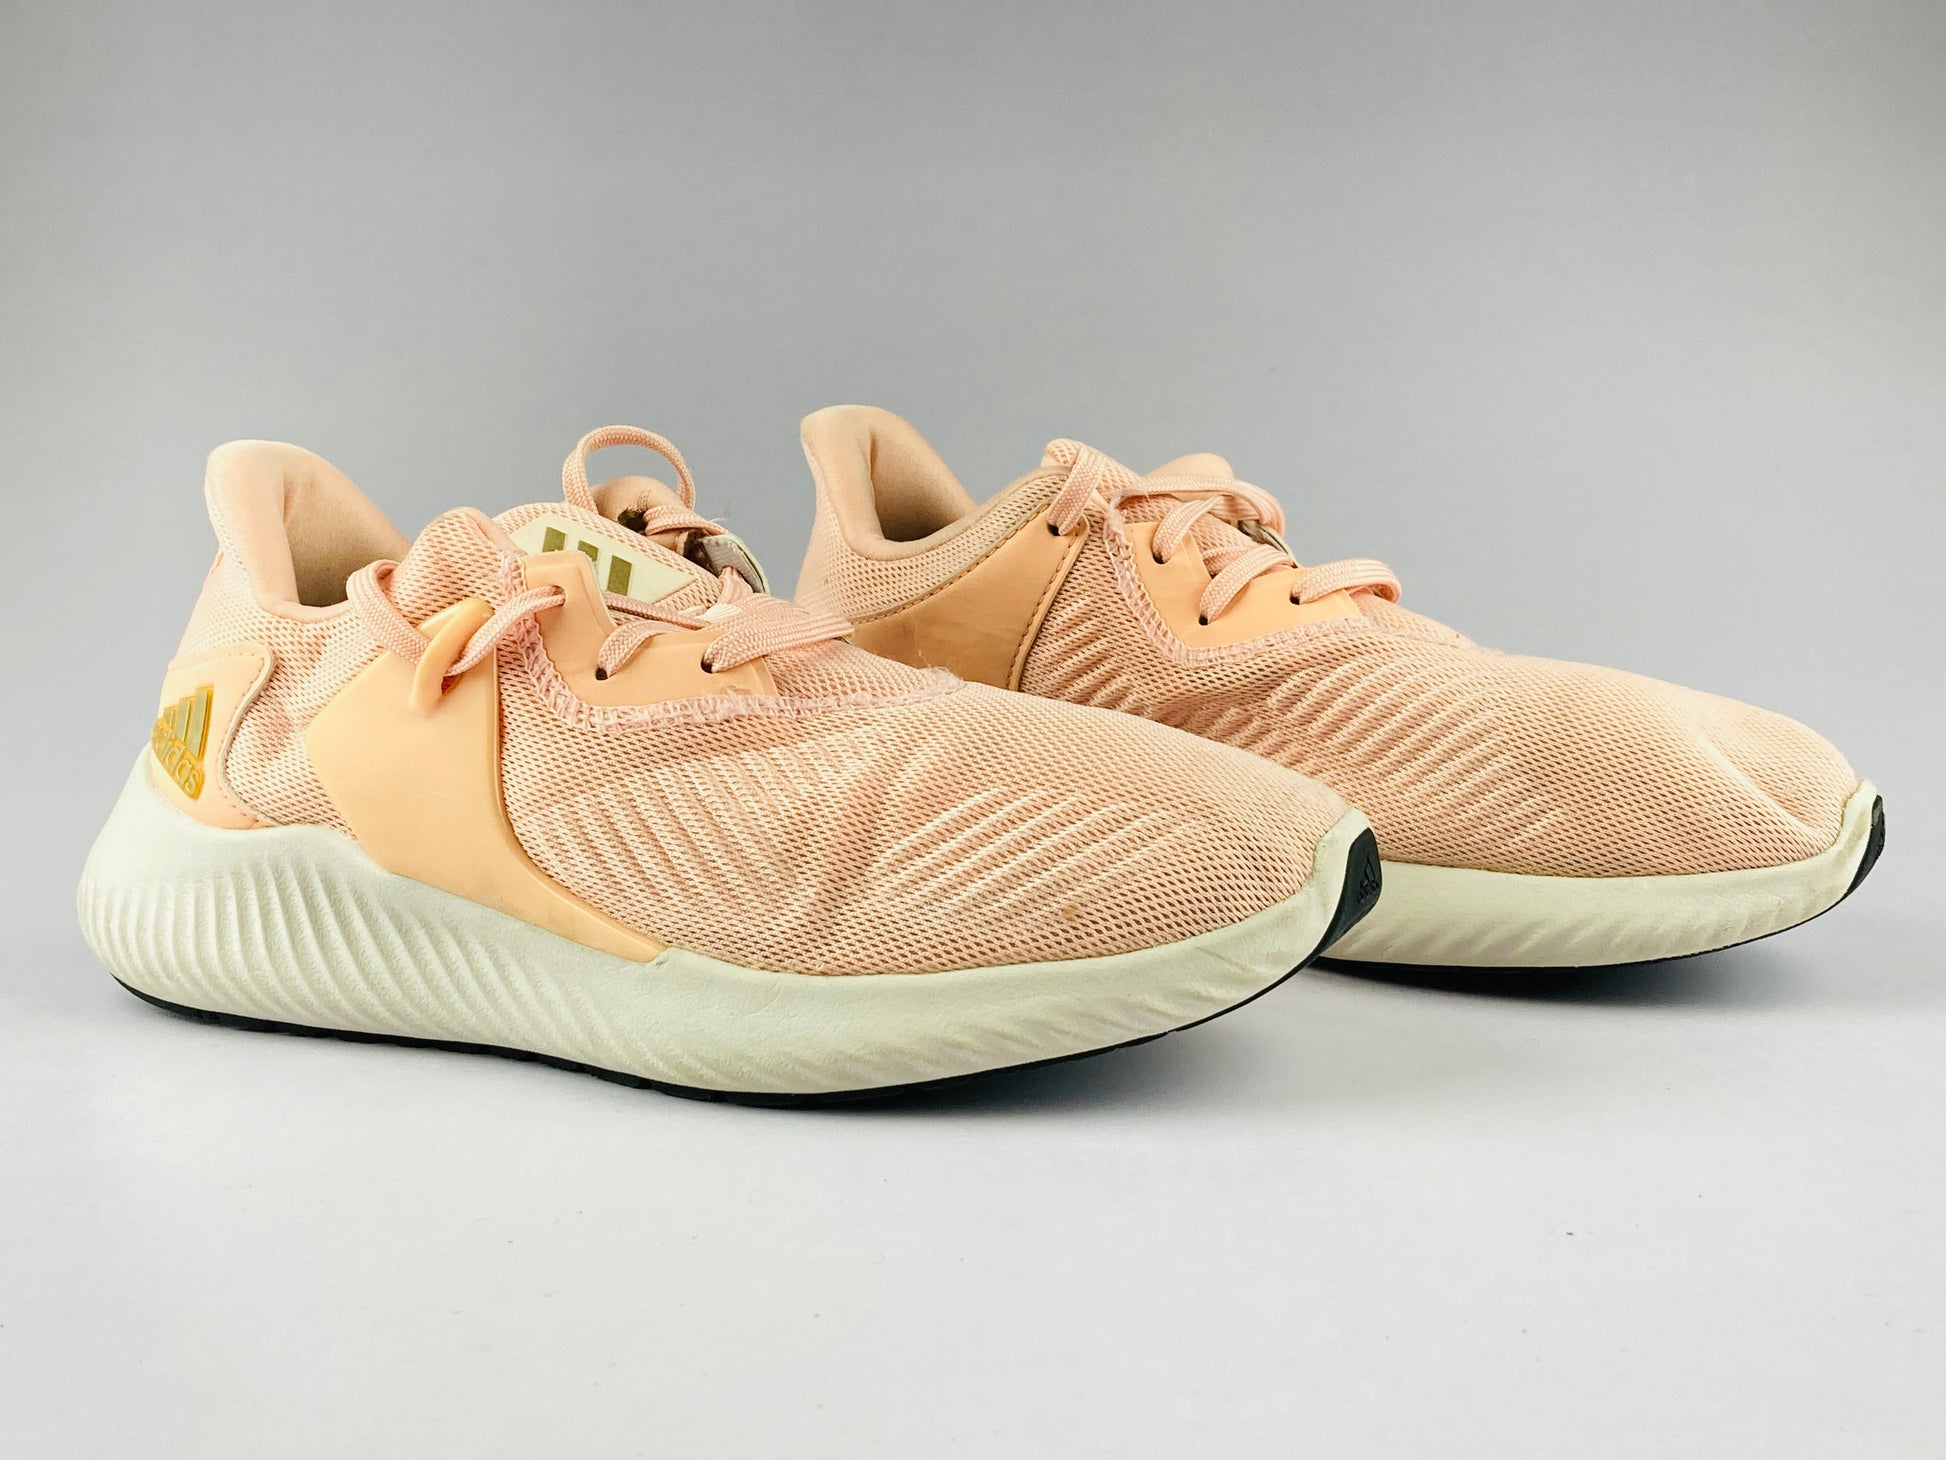 adidas Wmns Alphabounce Rc 2 W 'Glow pink/White/Grey one' F33904-Sneakers-Athletic Corner